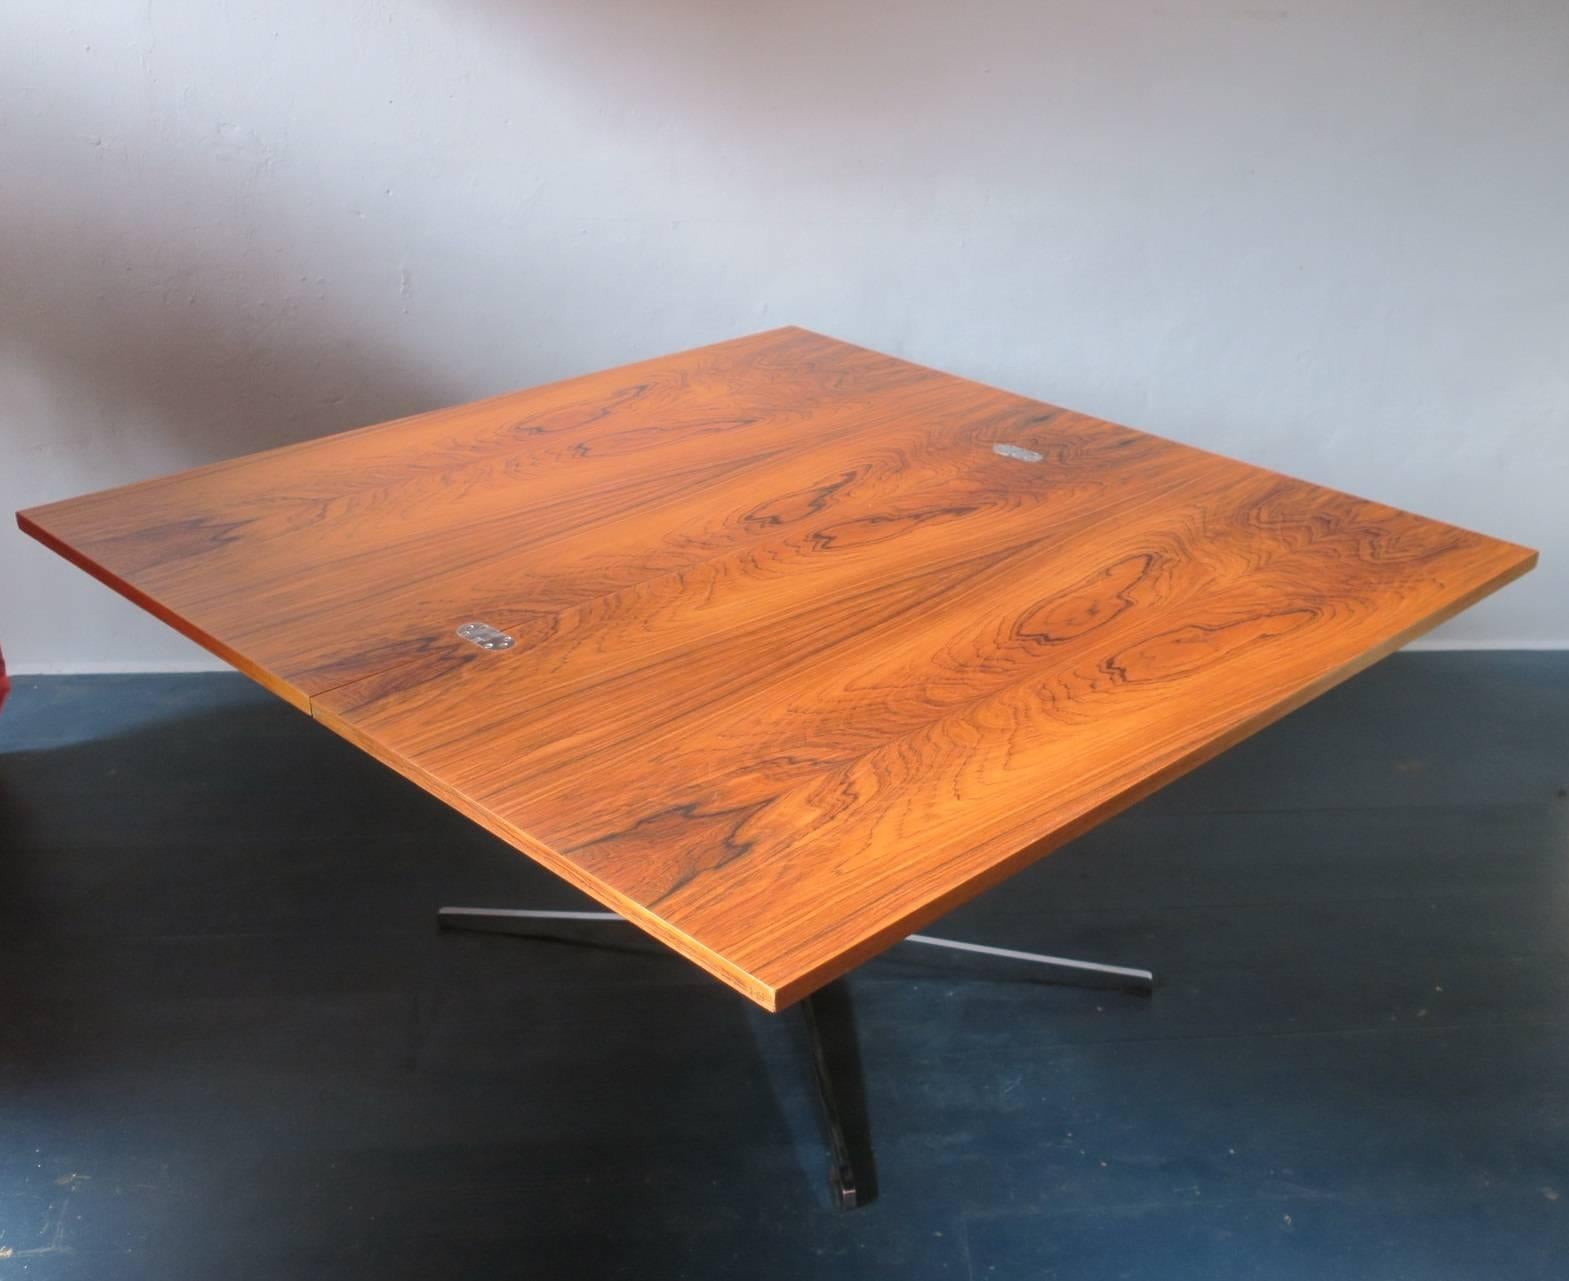 Multi-purpose rosewood table by Wilhelm Renz, 1960s.
Beautiful grain.
The table can be raised or lowered from dining table height down to coffee table (29 inch / 21 inch height). Can be set by means of a handle underneath at any height in that